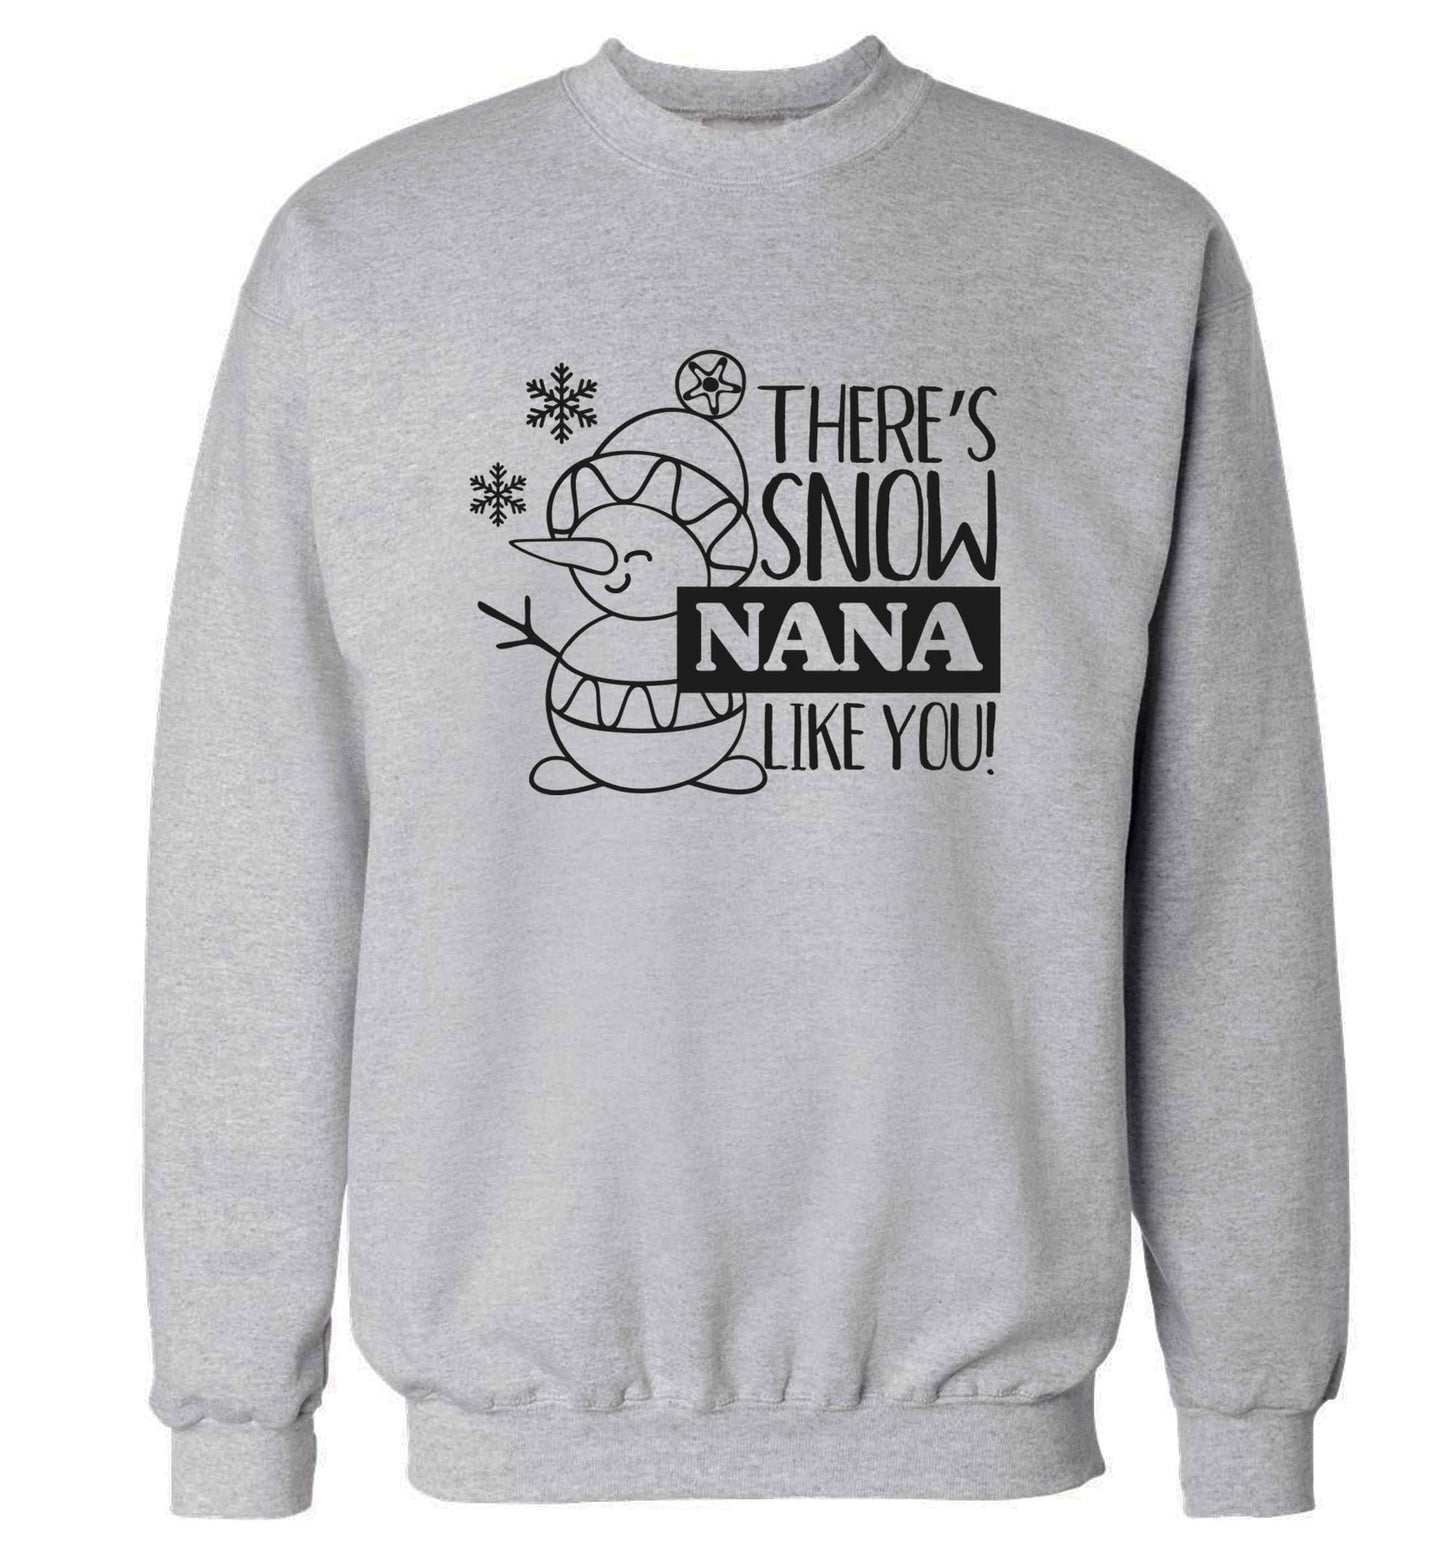 There's snow nana like you adult's unisex grey sweater 2XL